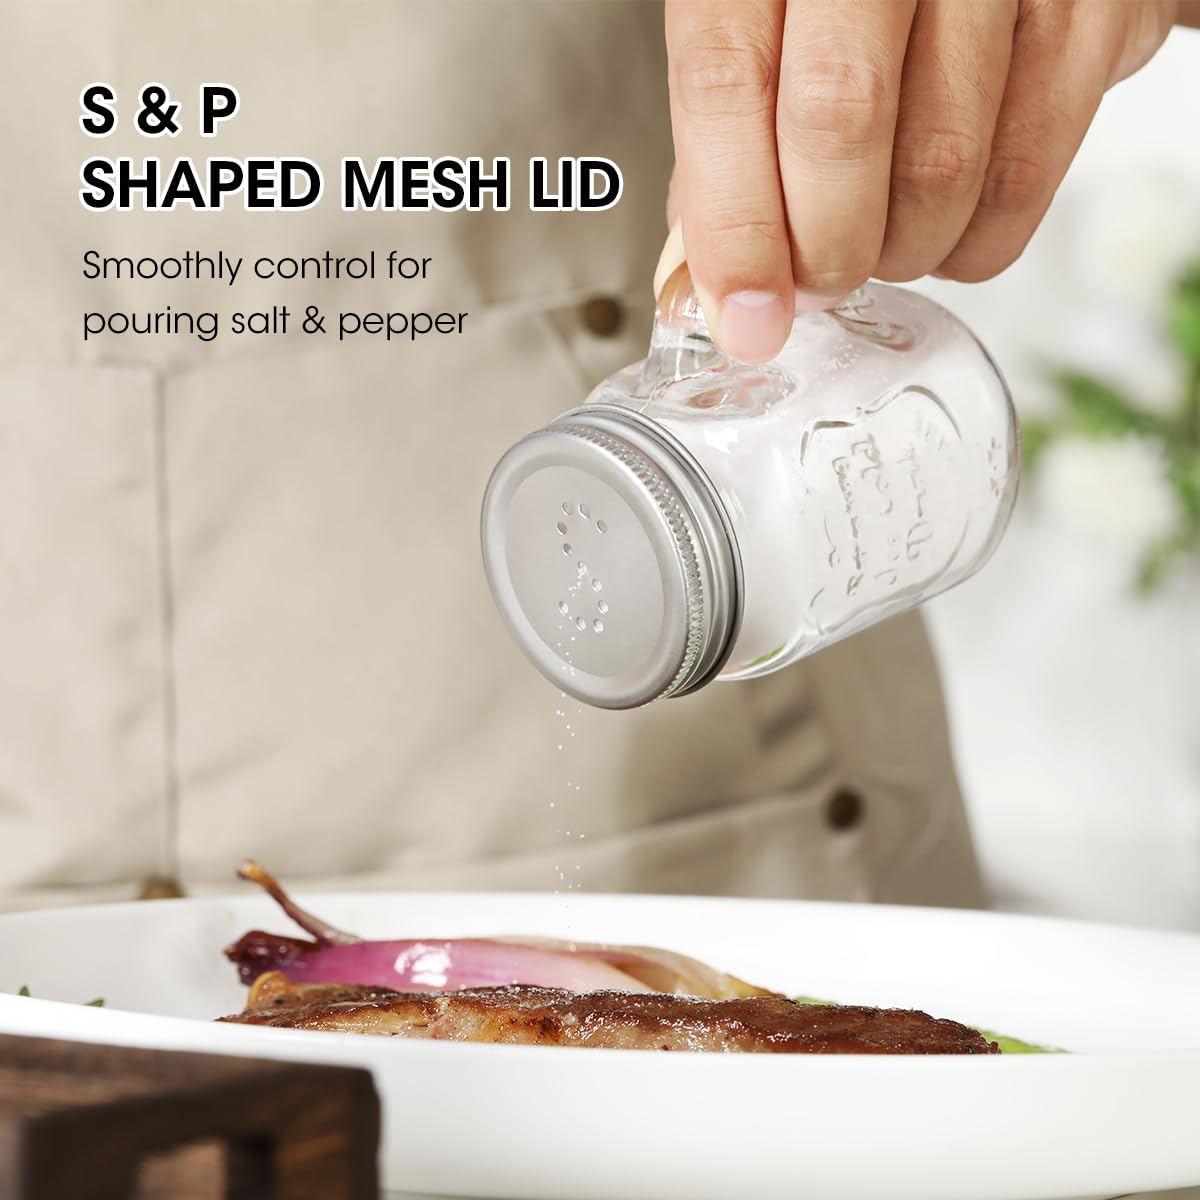 smoothly control for pouring salt & pepper